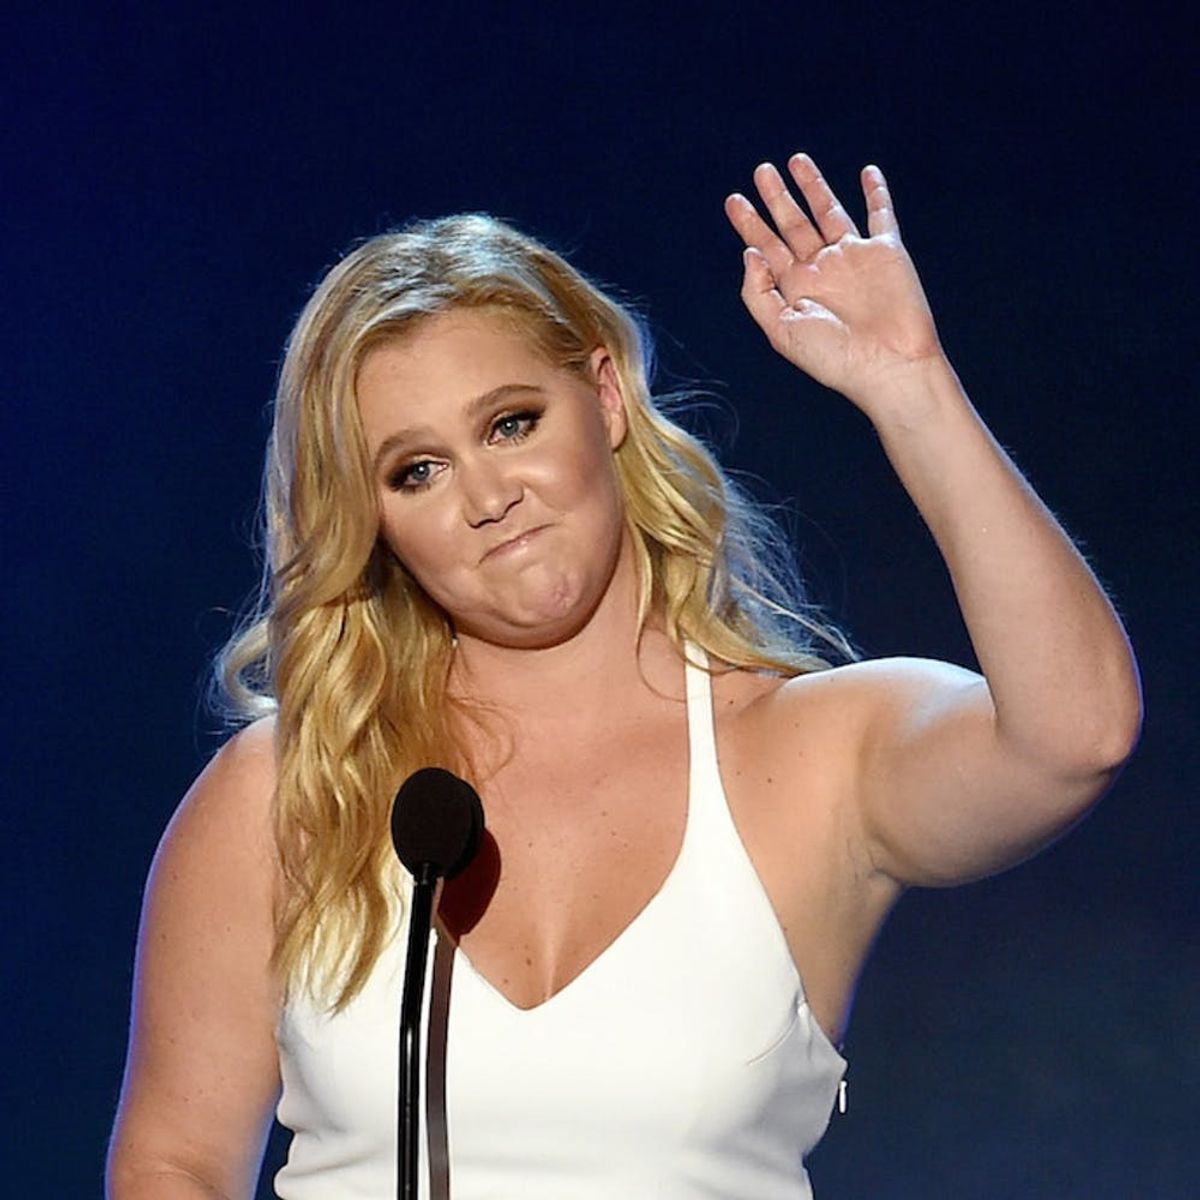 Amy Schumer’s Baby Bump Photo Is Predictably Hilarious